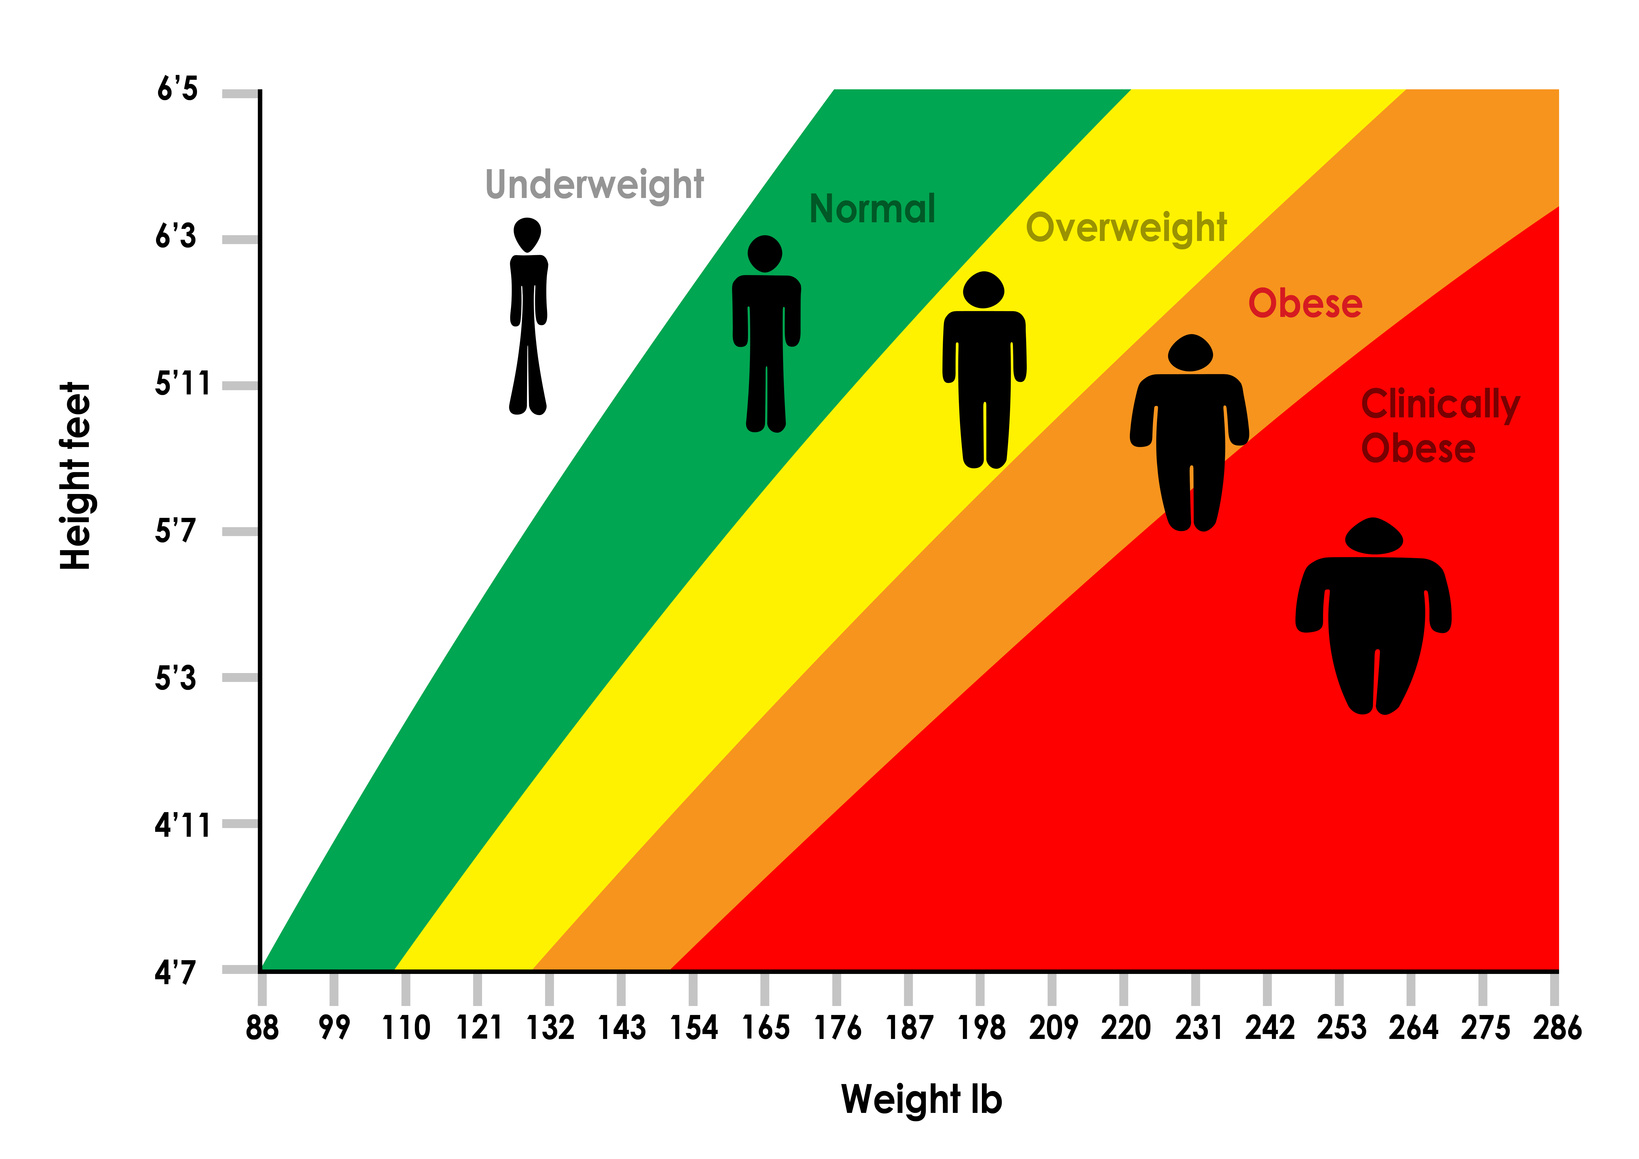 Body Mass Index Chart For Child